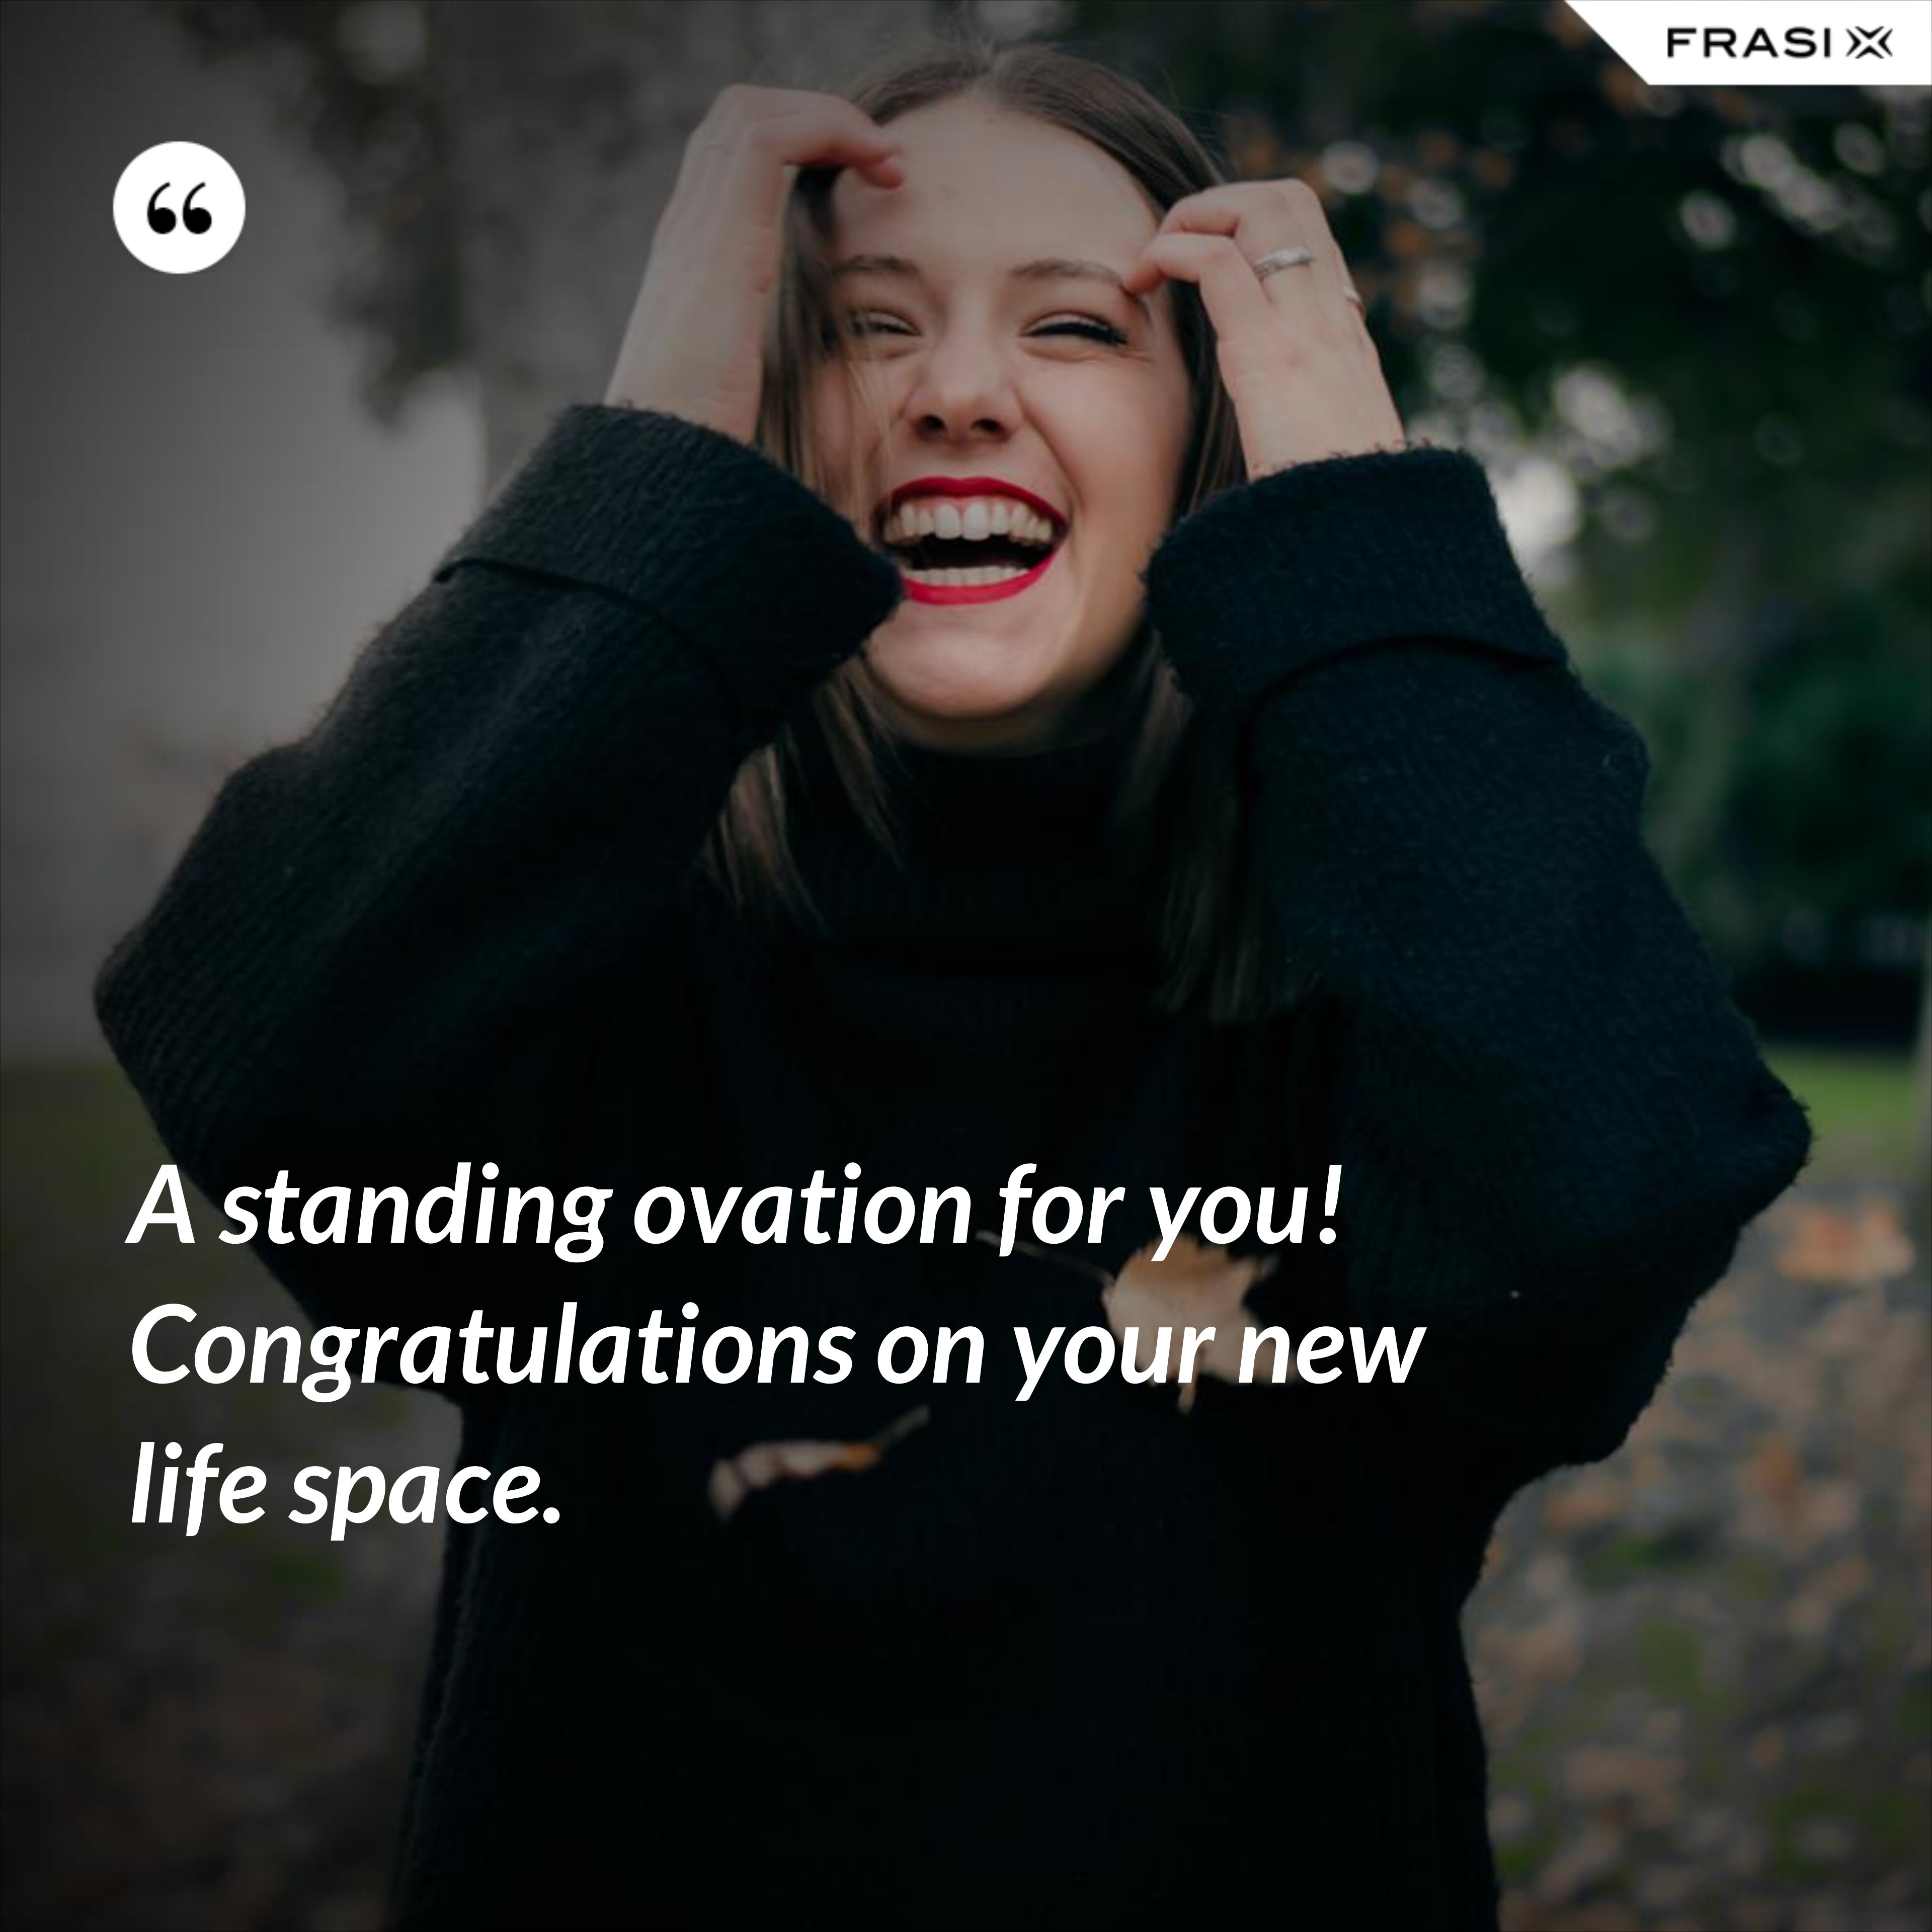 A standing ovation for you! Congratulations on your new life space. - Anonimo